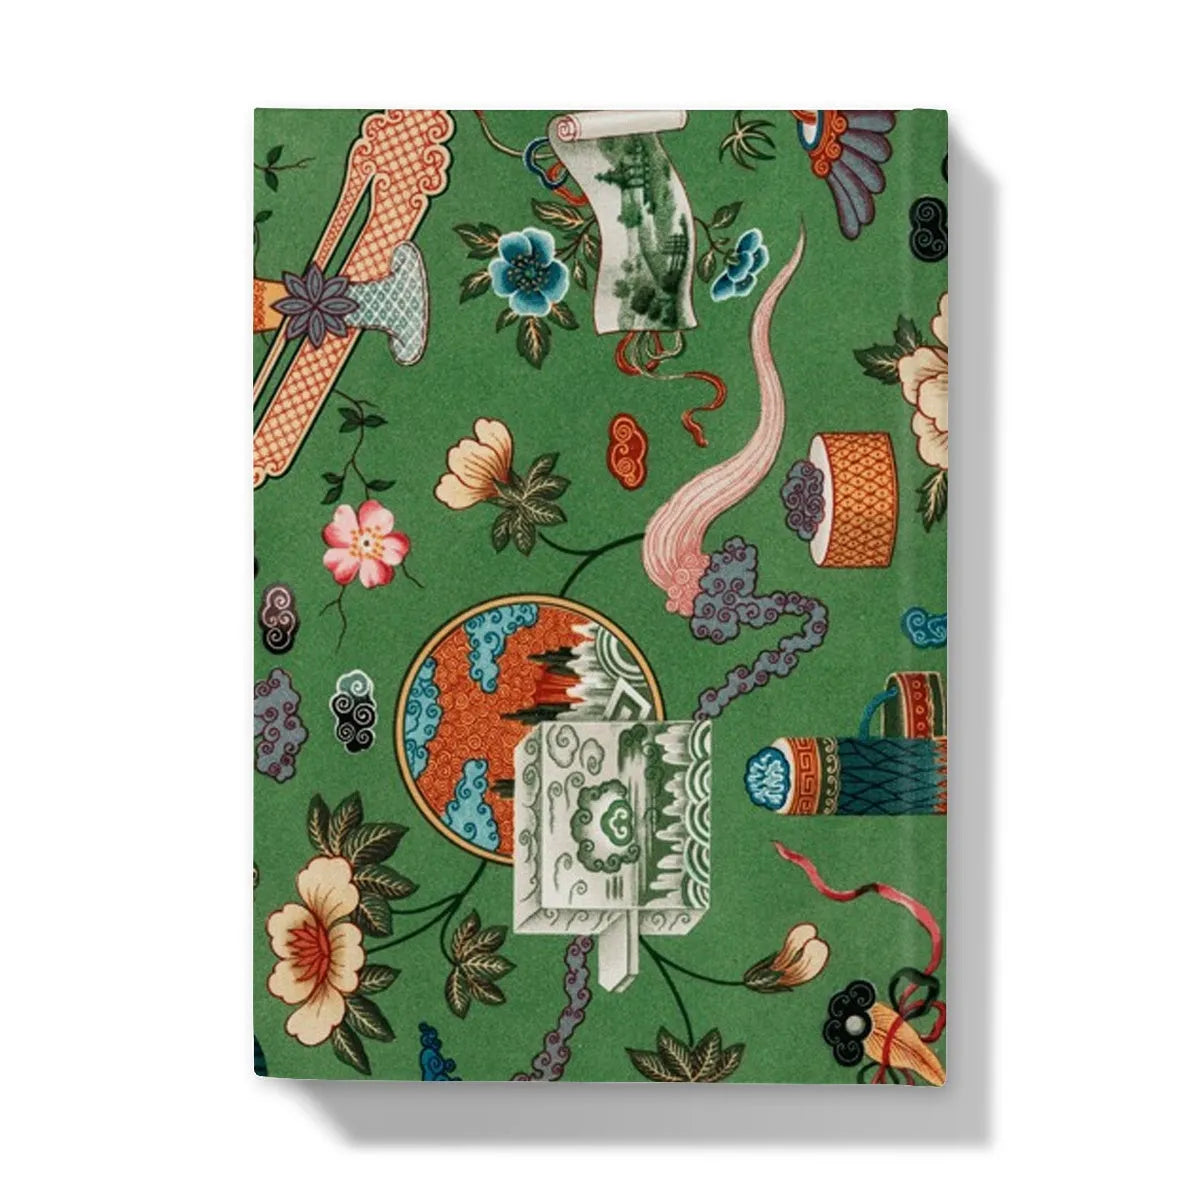 This Chinese Pattern By Auguste Racinet Hardback Journal - Notebooks & Notepads - Aesthetic Art